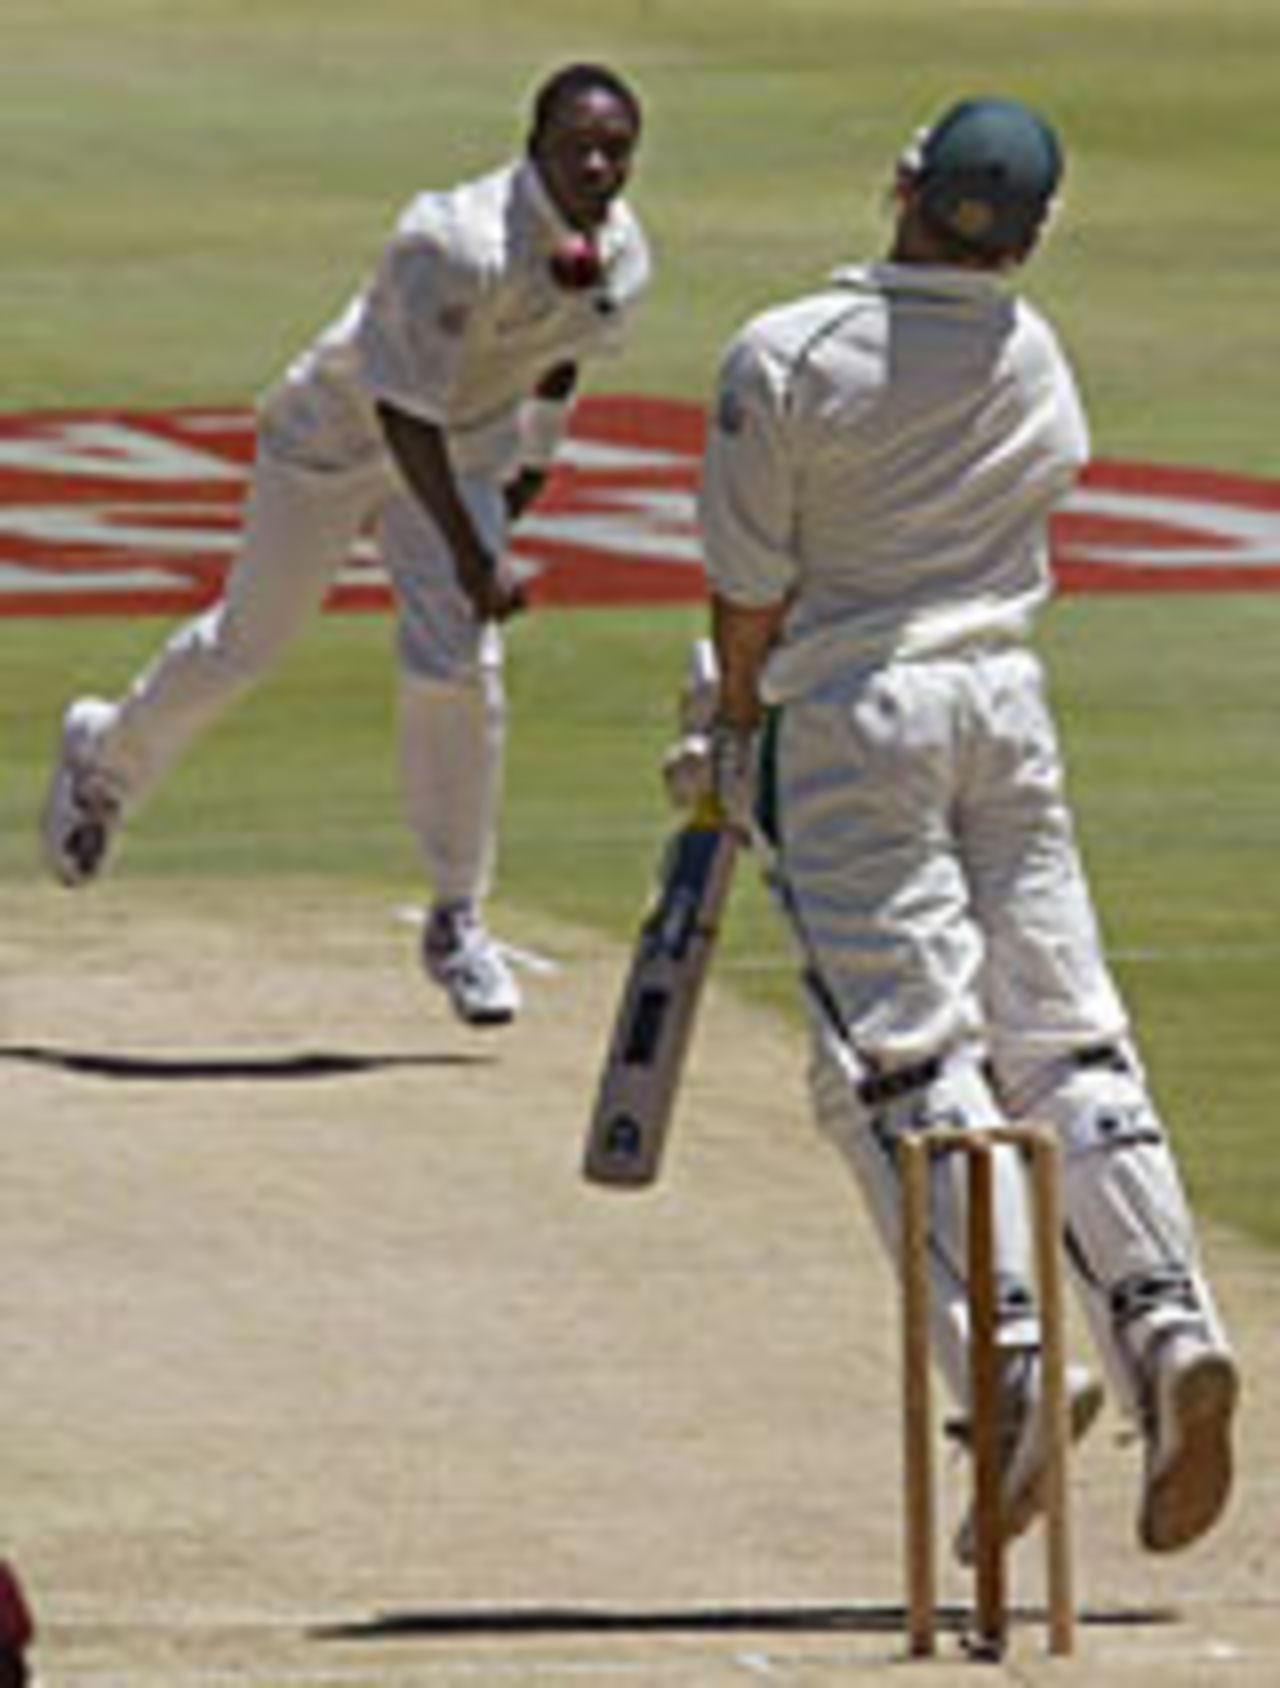 Graeme Smith avoids a Fidel Edwards bouncer on his way to a hundred, South Africa v West Indies, 1st Test, Johannesburg, December 12, 2003